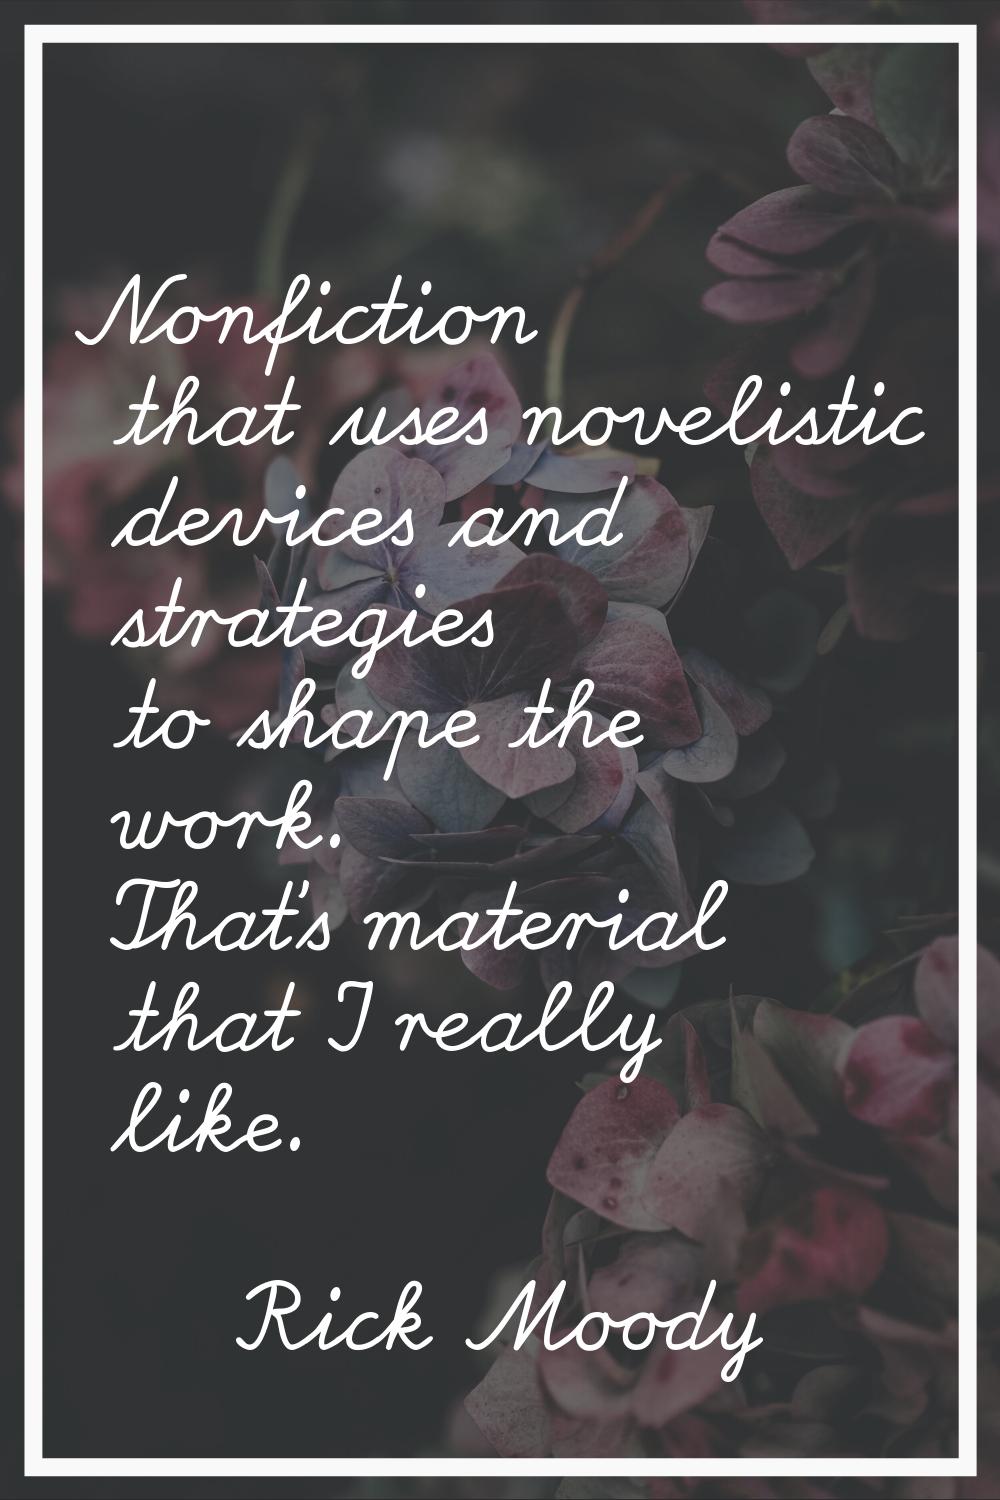 Nonfiction that uses novelistic devices and strategies to shape the work. That's material that I re